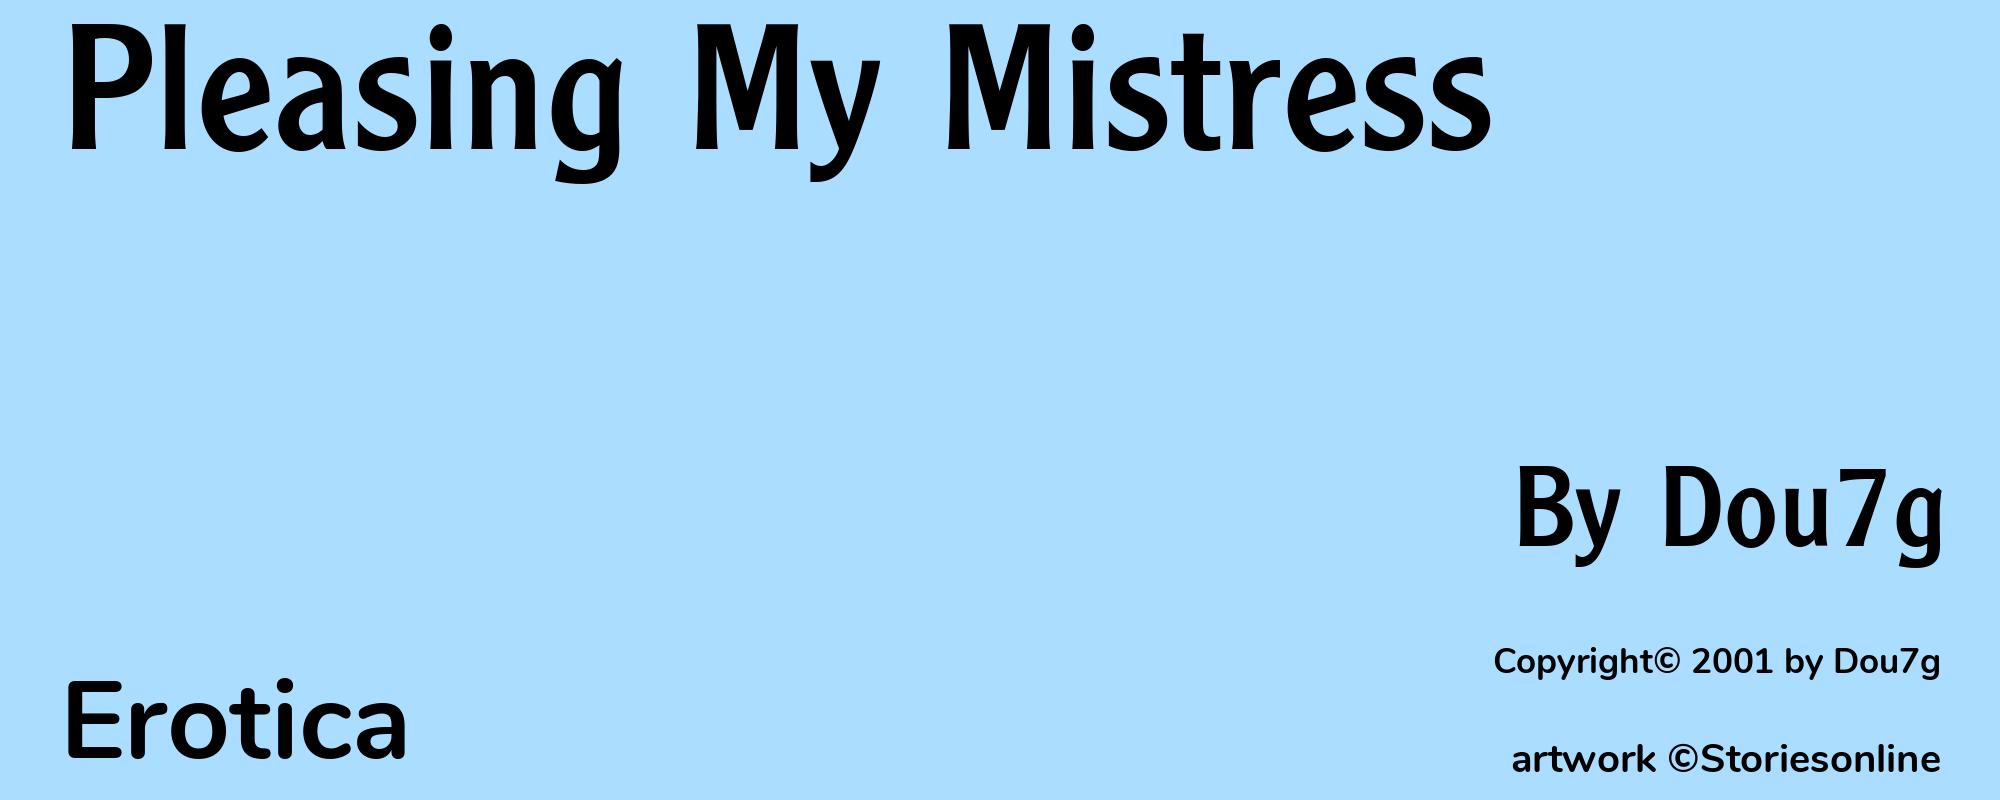 Pleasing My Mistress - Cover